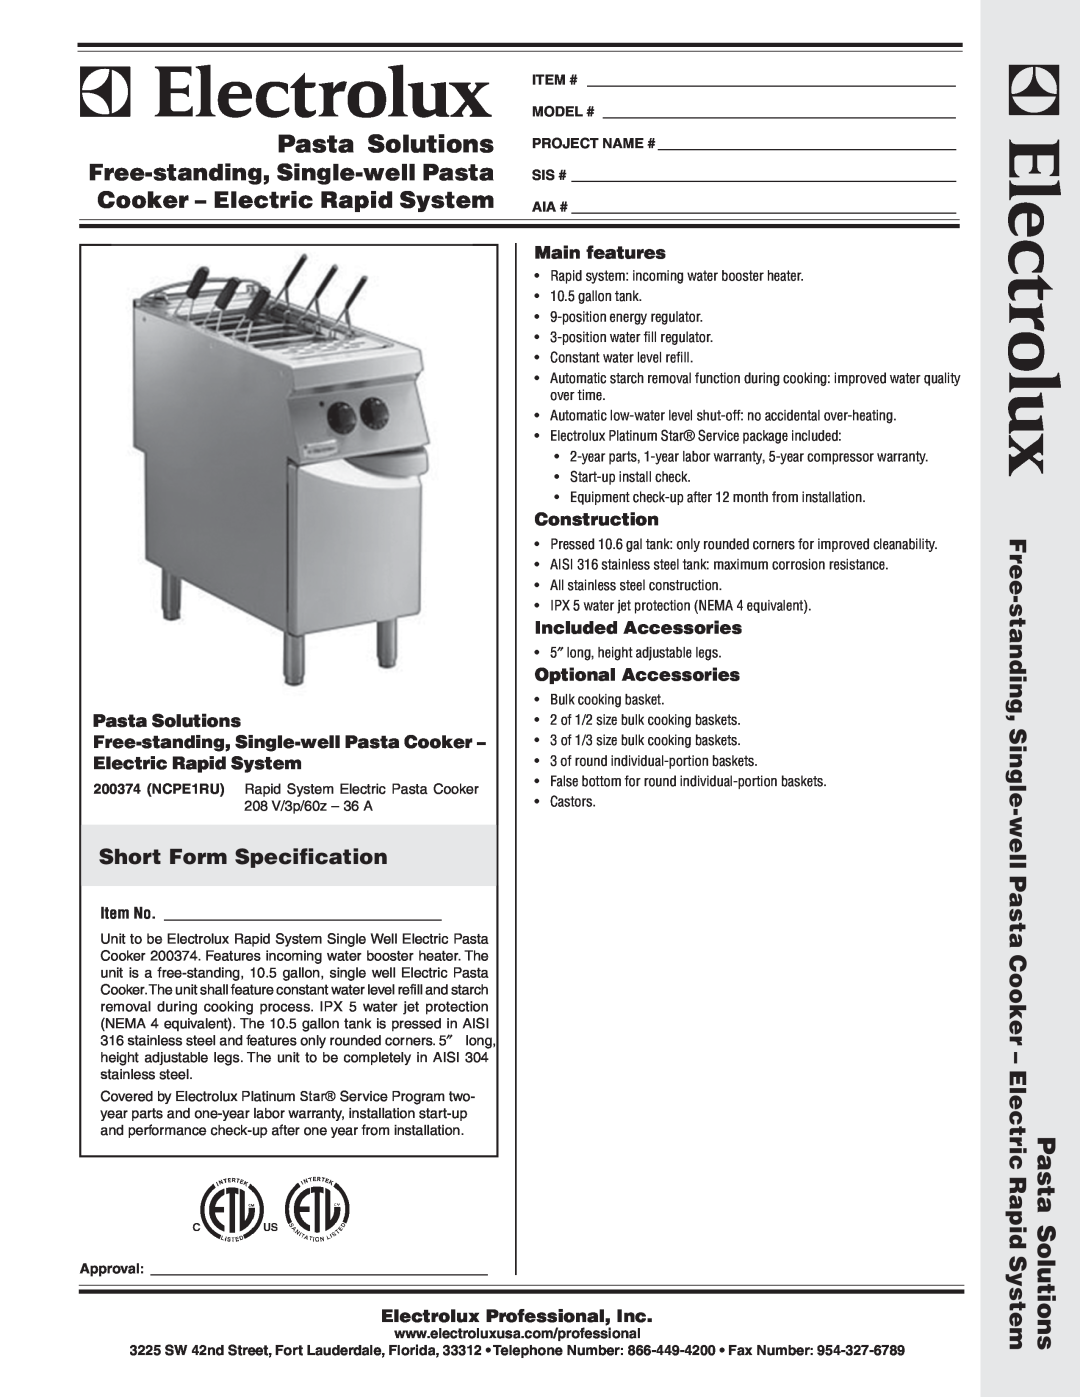 Electrolux NCPE1RU, 200374 warranty Short Form Specification, Pasta Solutions, Free-standing, Single-wellPasta Cooker 